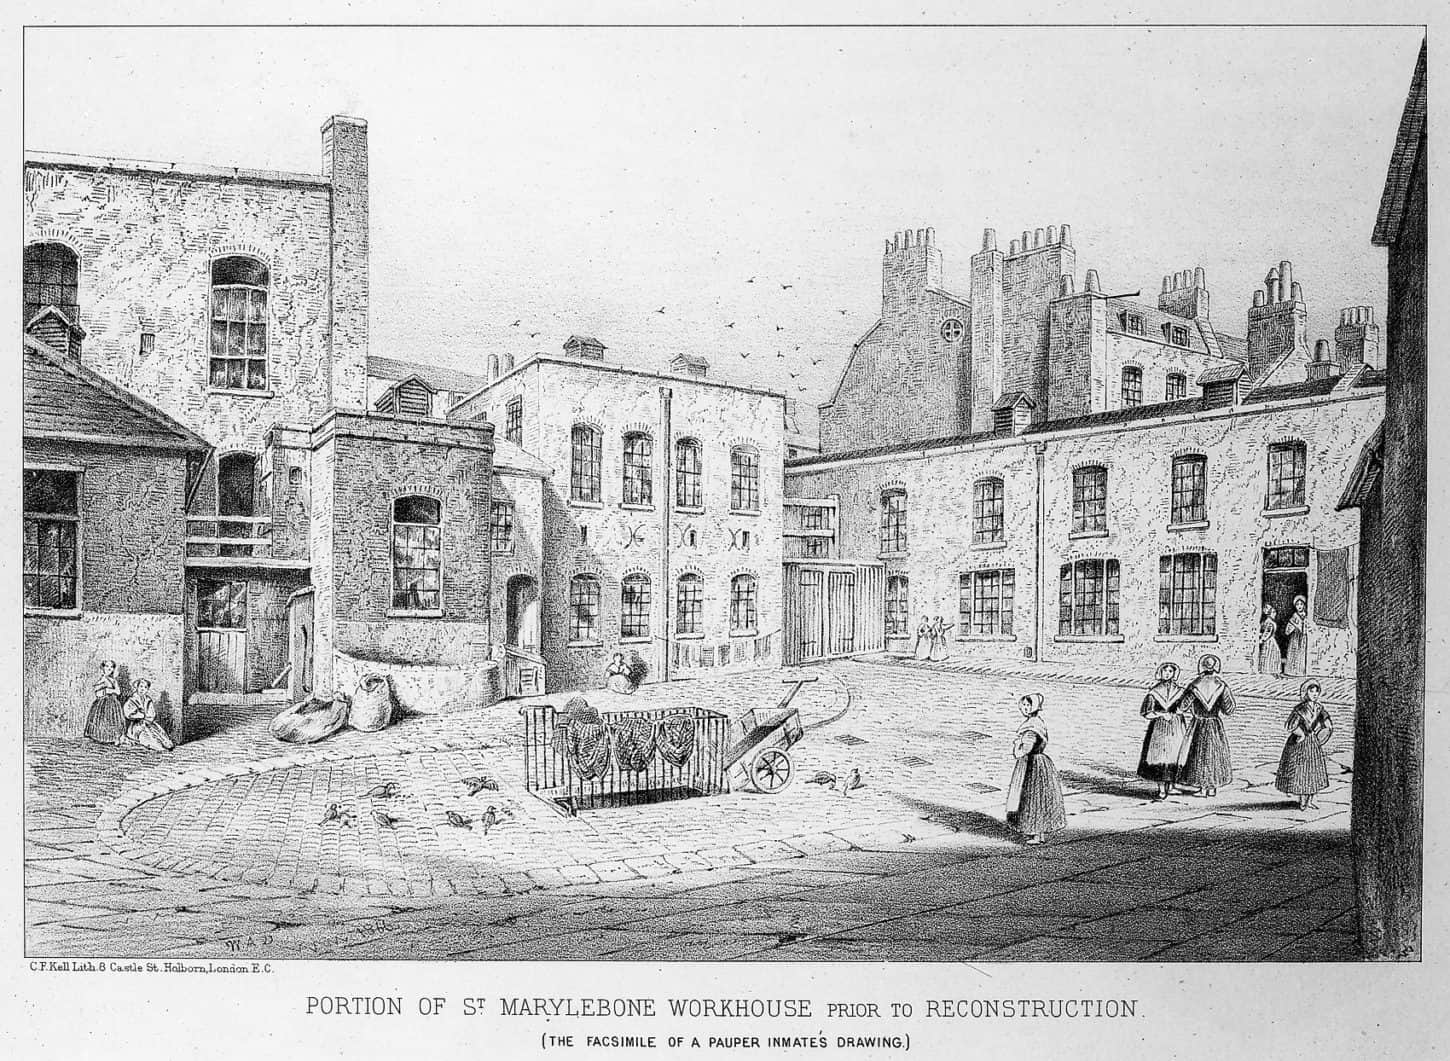 Part of St. Marylebone Workhouse prior to reconstruction.